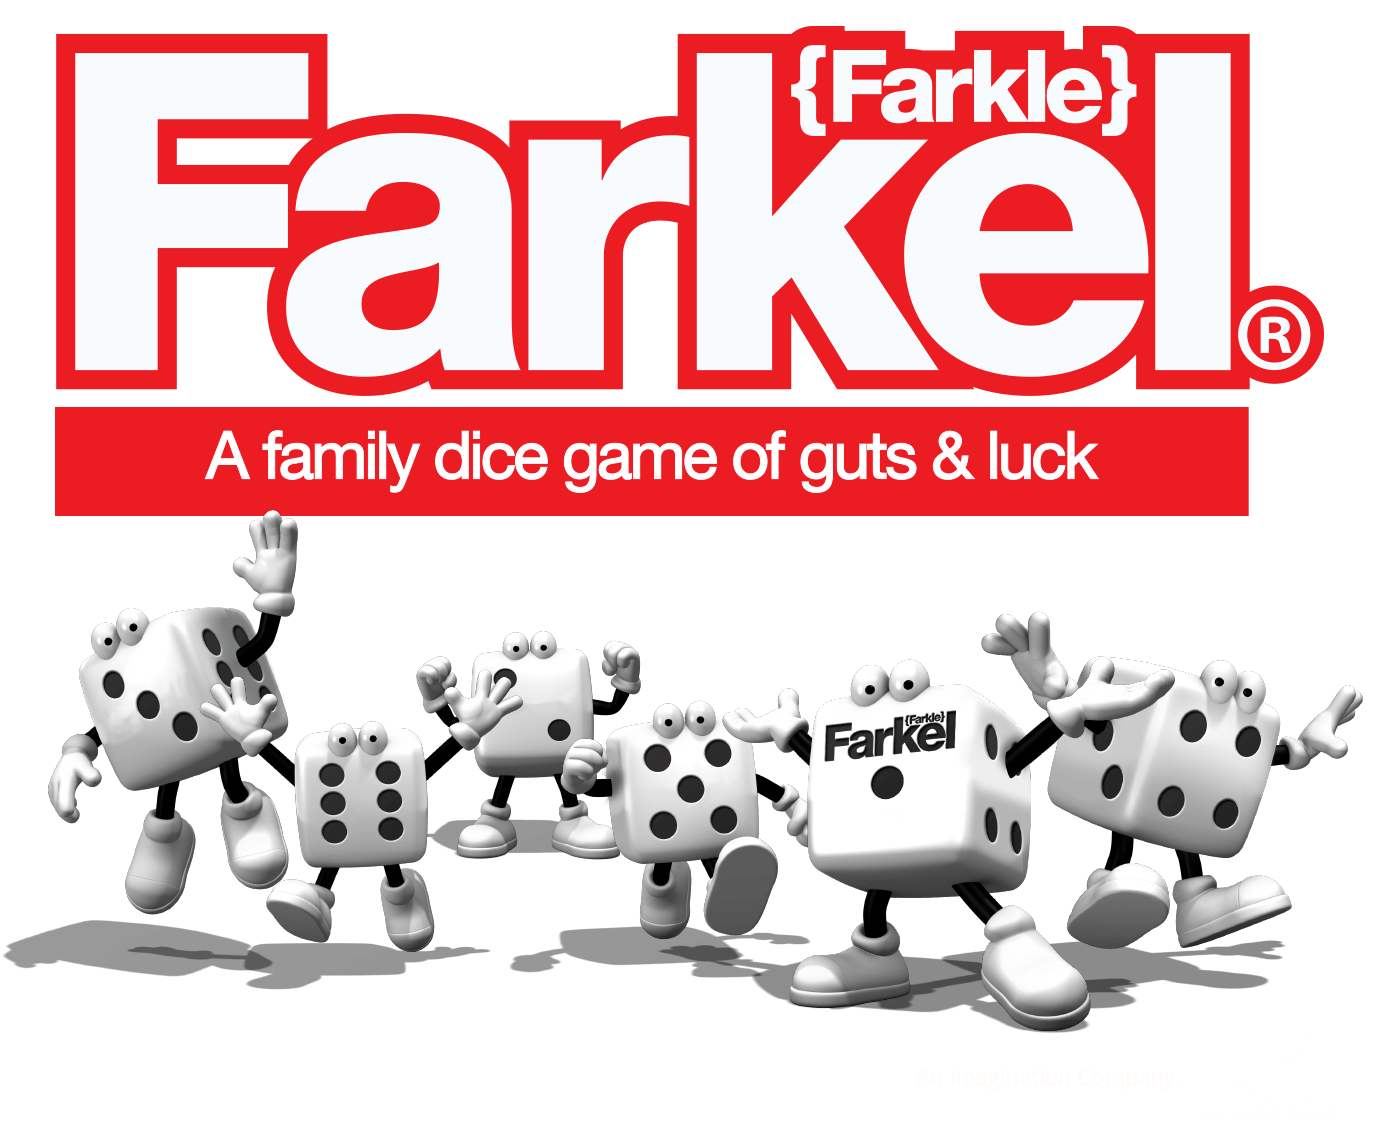 Farkle Logo - Farkel – A family Dice game of guts and luck